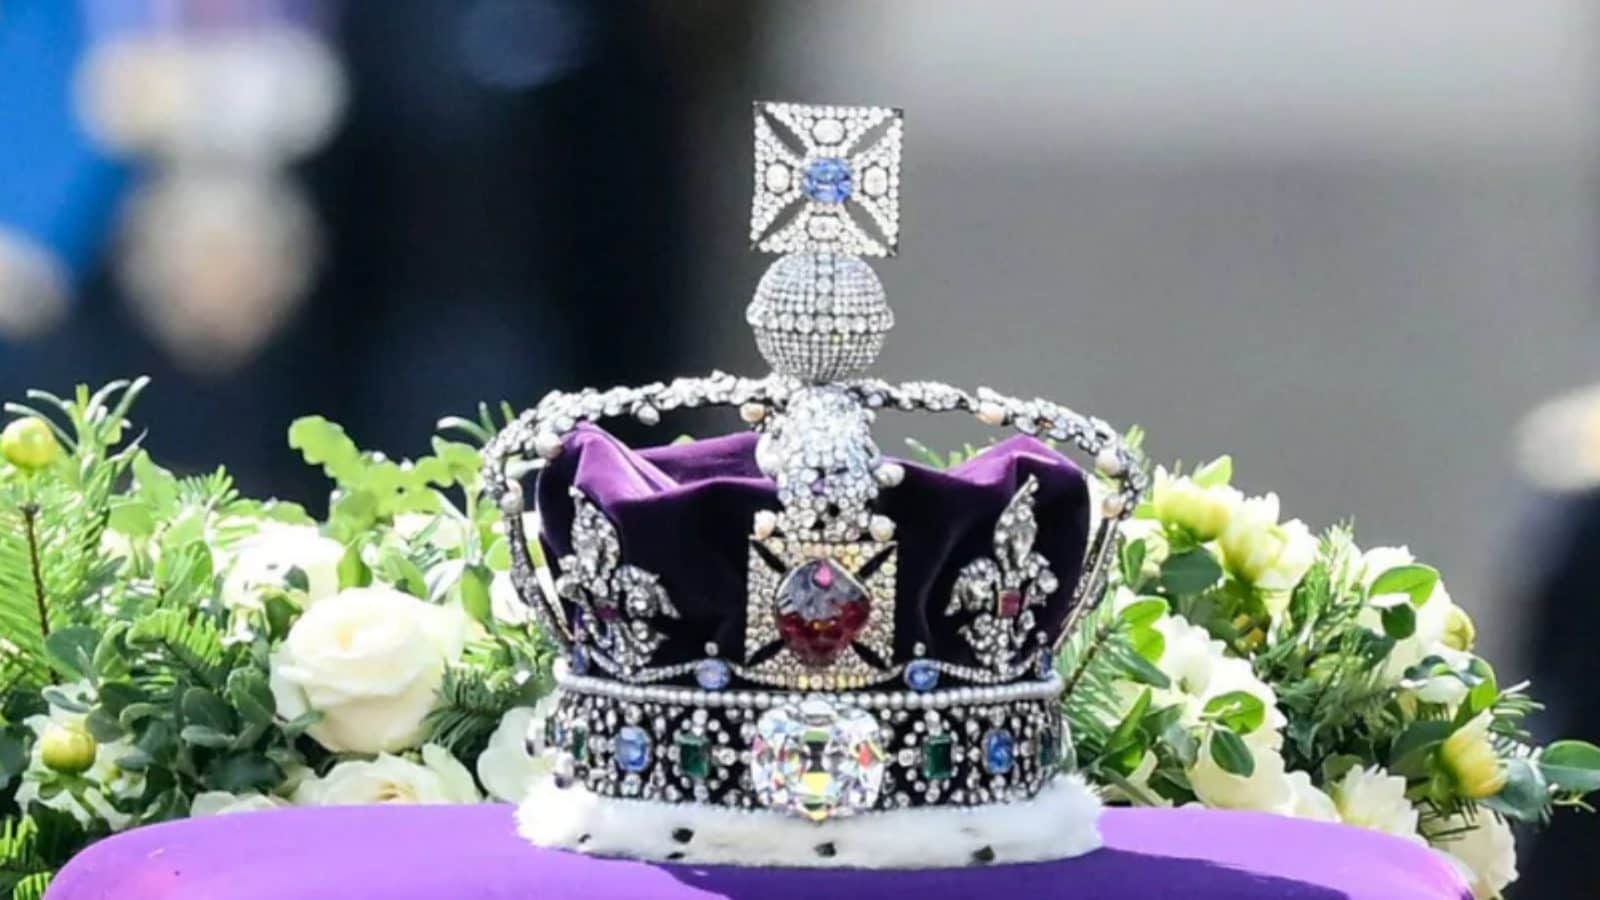 koh-i-noor - latest news, breaking stories and comment - The Independent